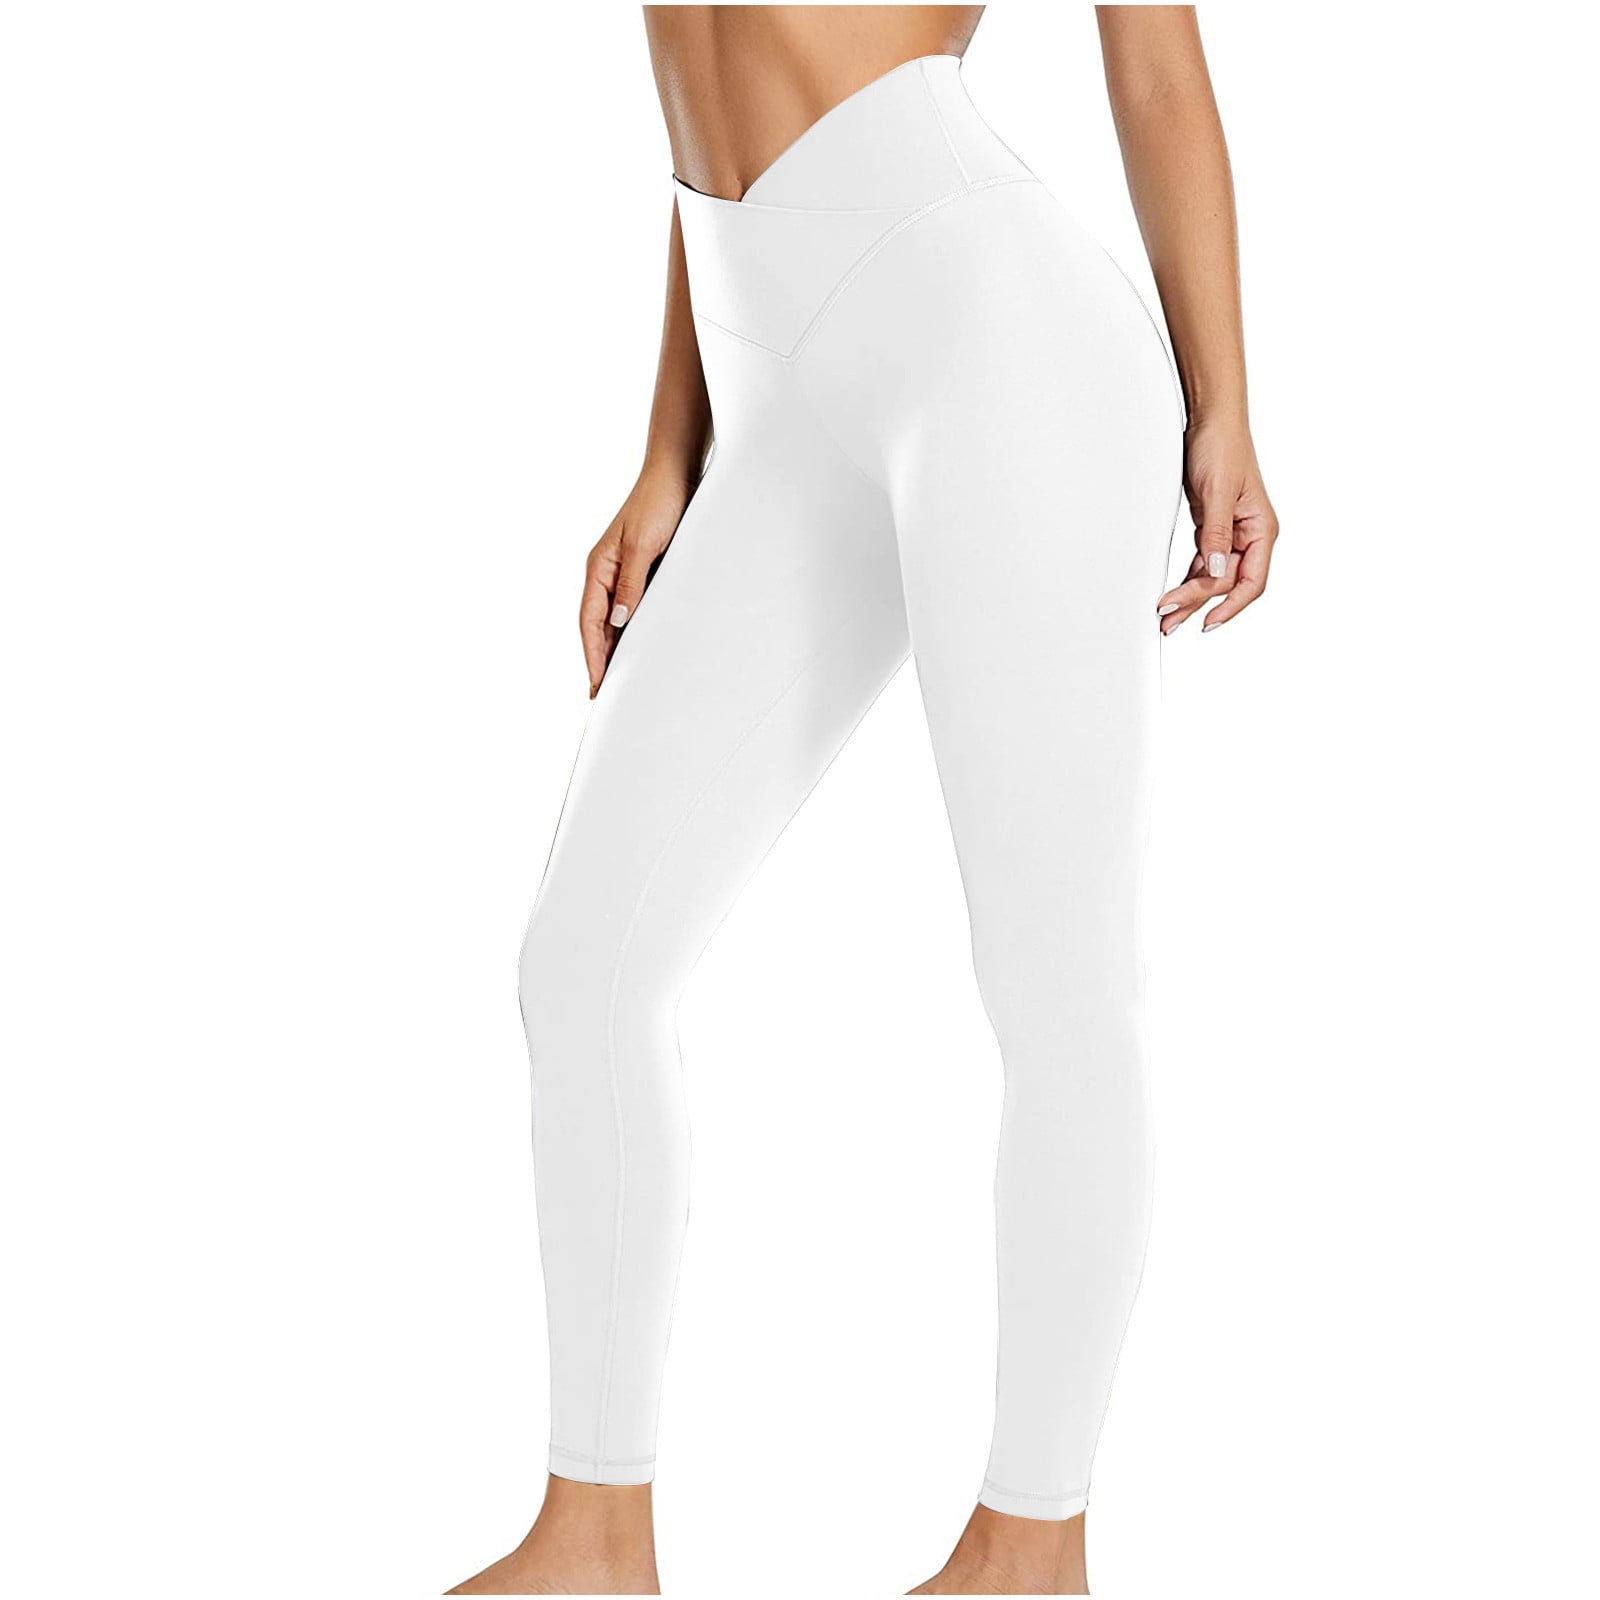 V Crossover Leggings for Women Solid Butt Lifting High Waist Seamless Workout  Yoga Pants Buttery Soft Athletic Pants(XXL，White） 